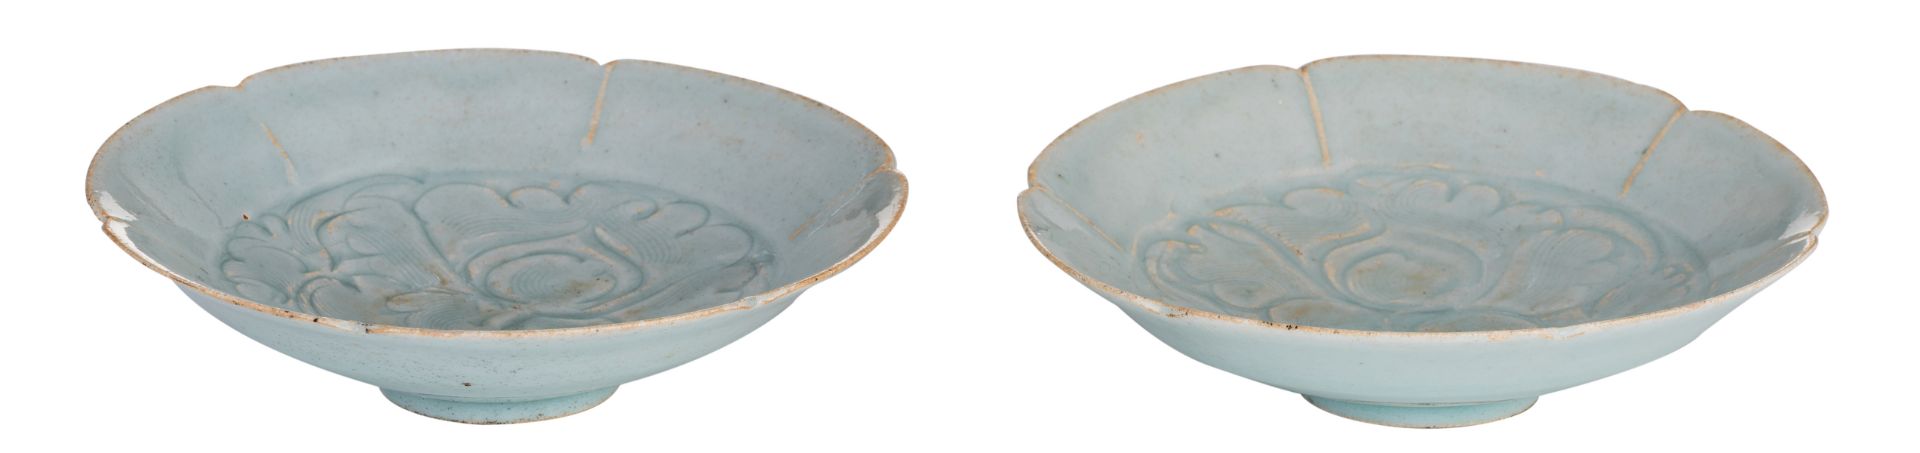 Two Chinese Song dynasty incised lotus shaped dishes with lobed edge, H 4 - ø 15,5 - 16 cm